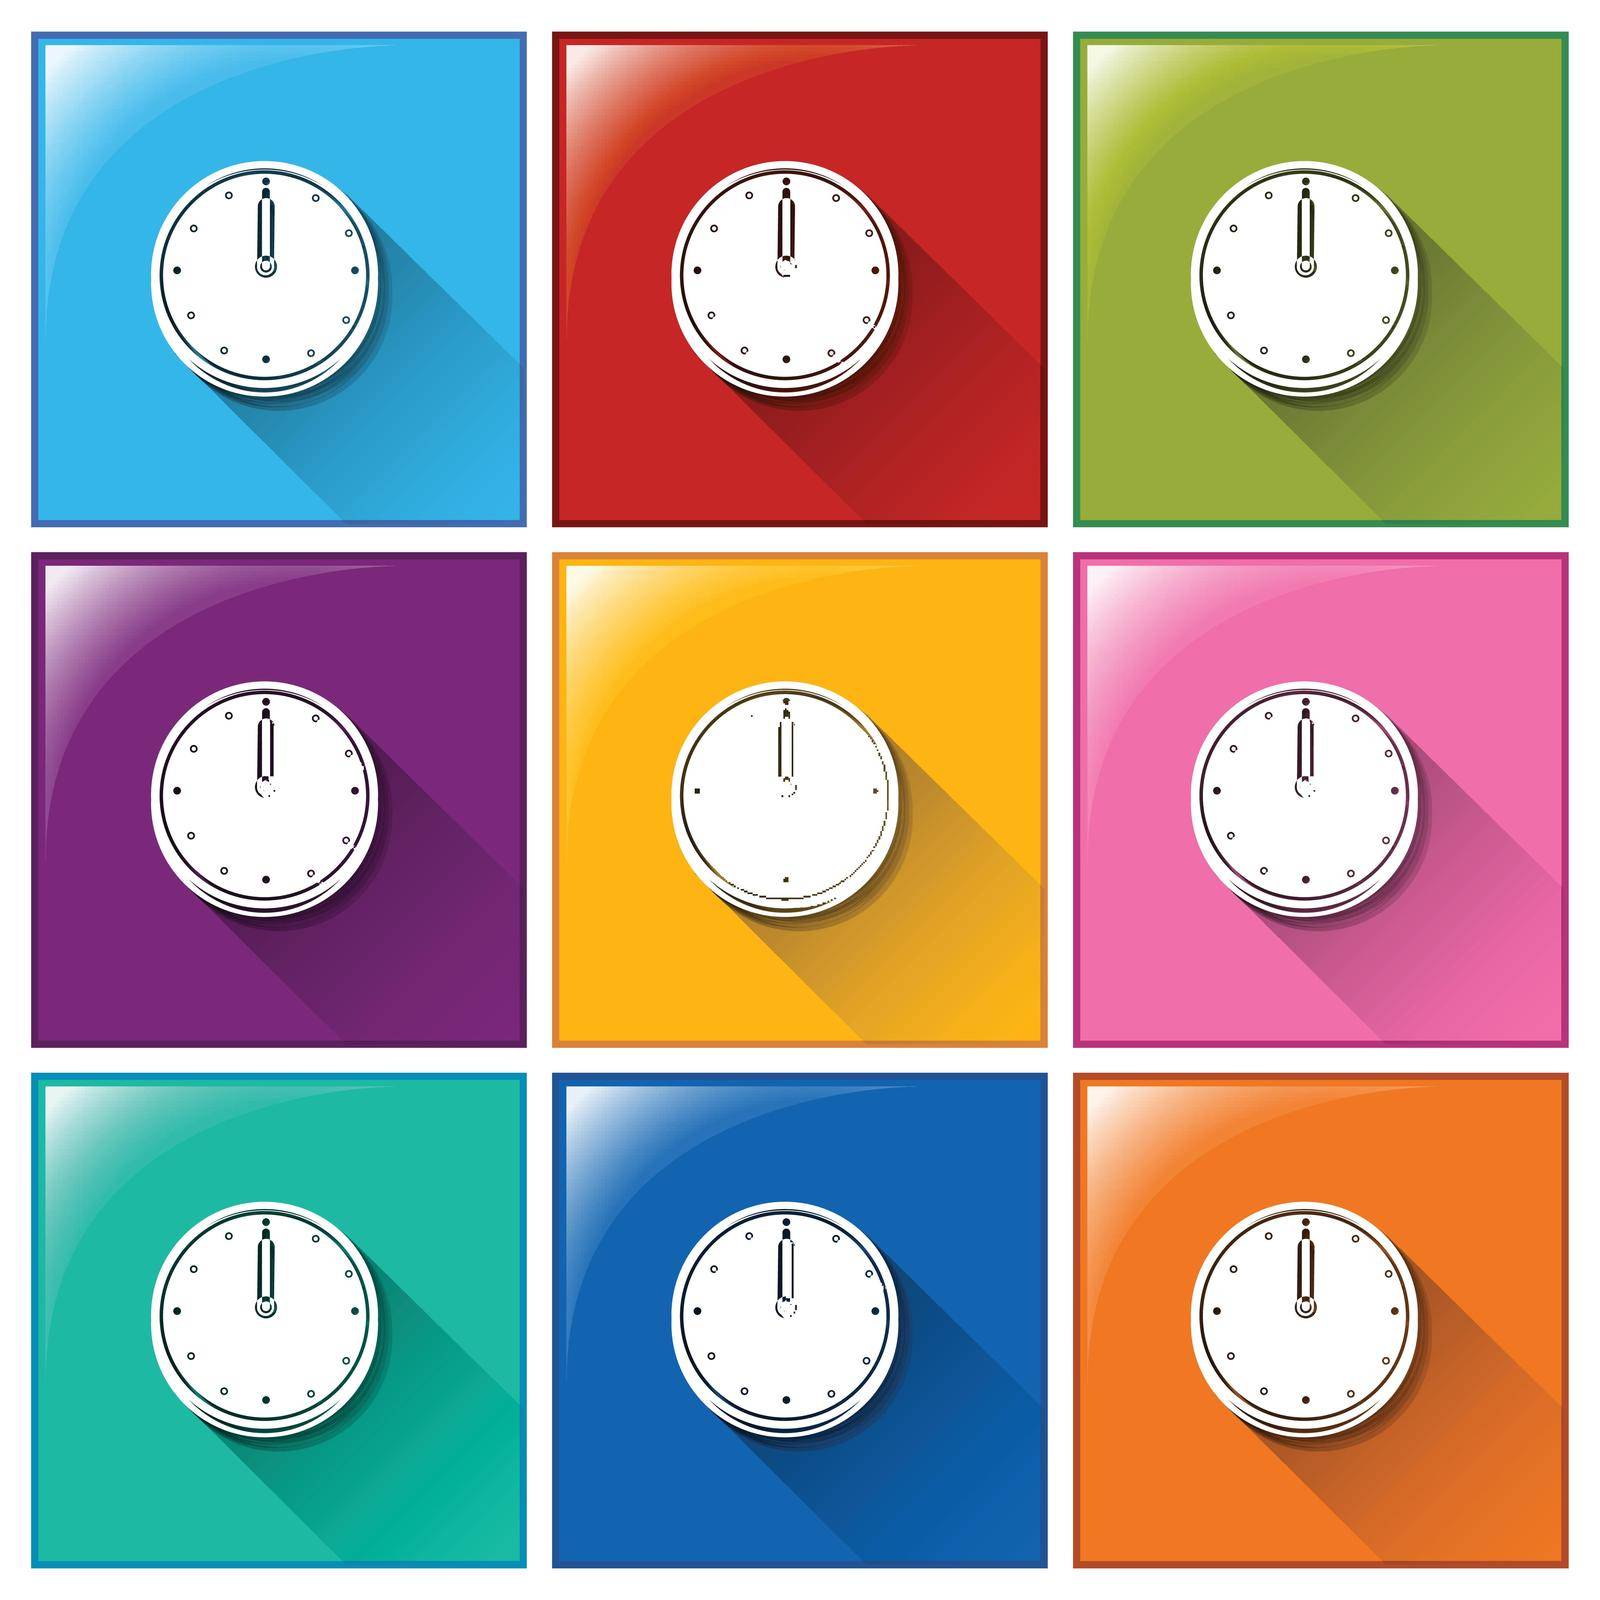 Illustration of the square buttons with clocks on a white background